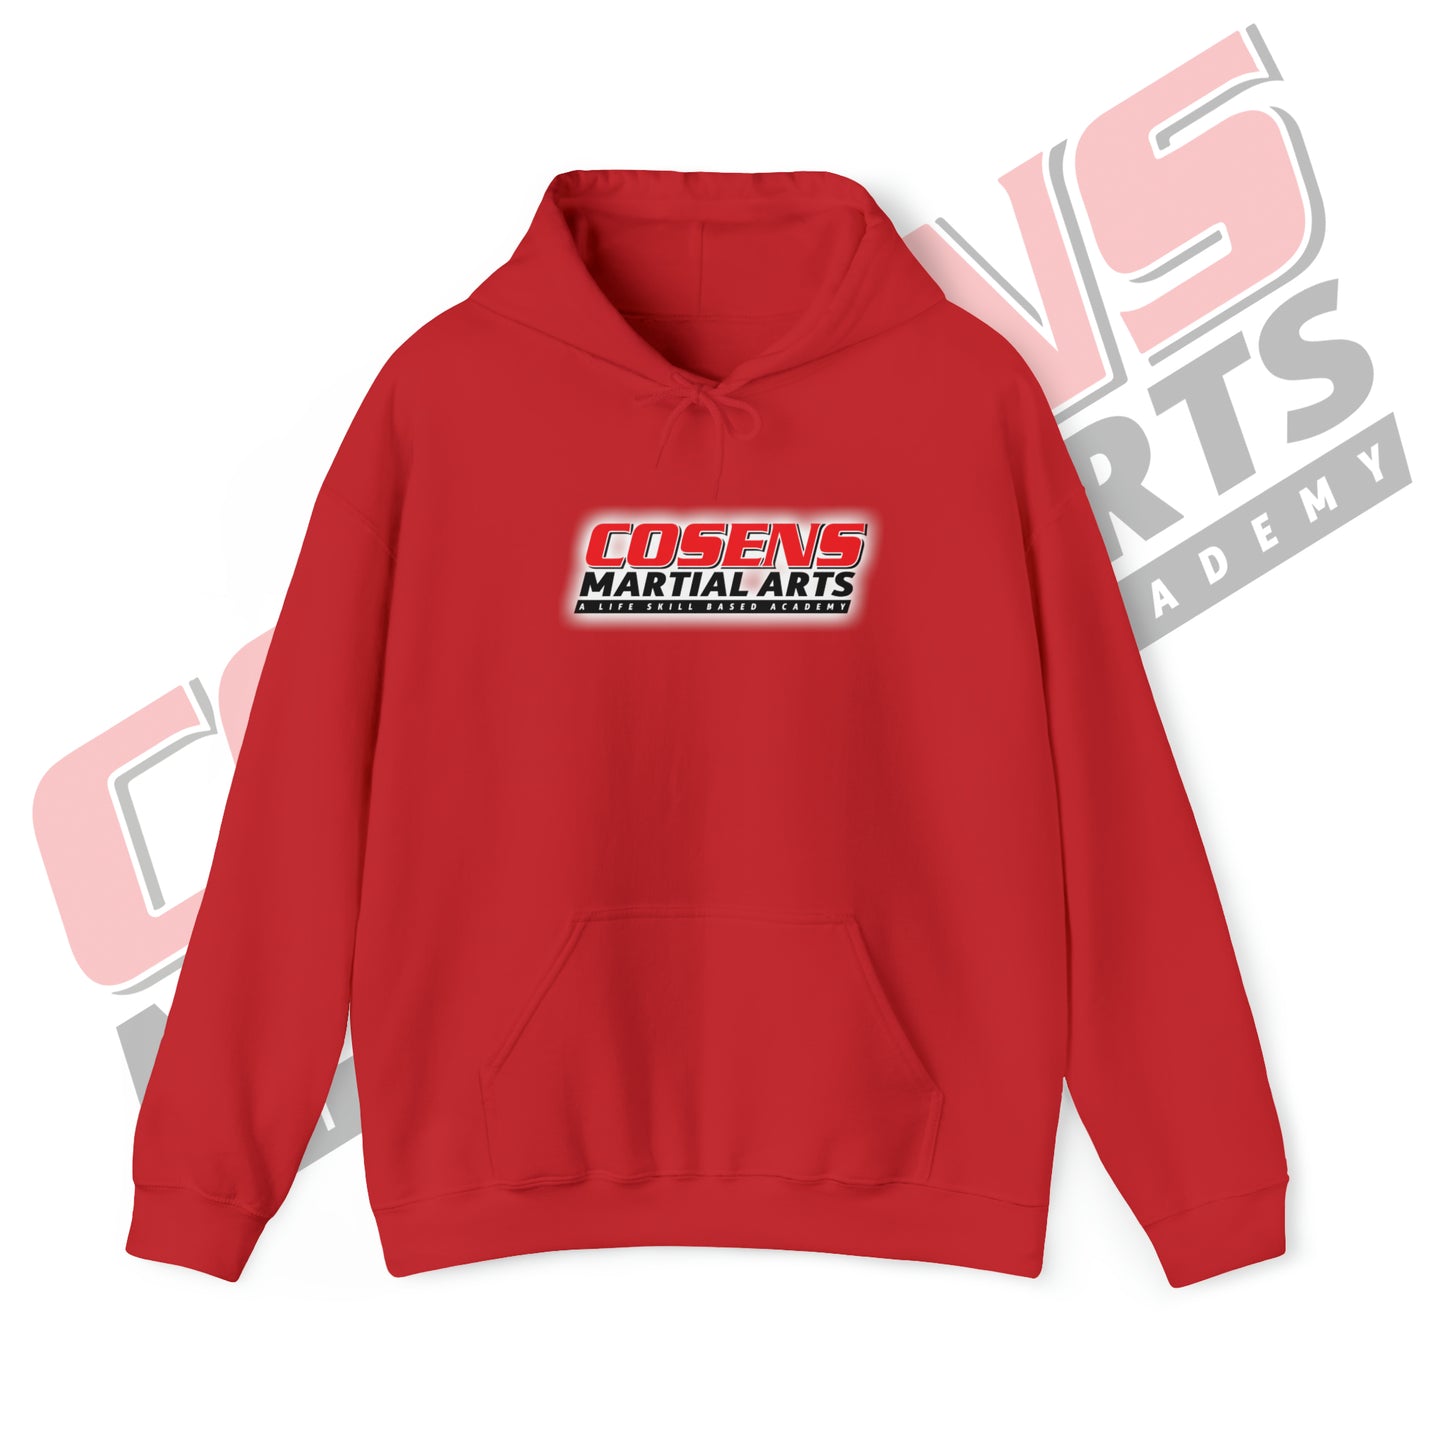 Adult Pullover Sweatshirt (Not customized with name)